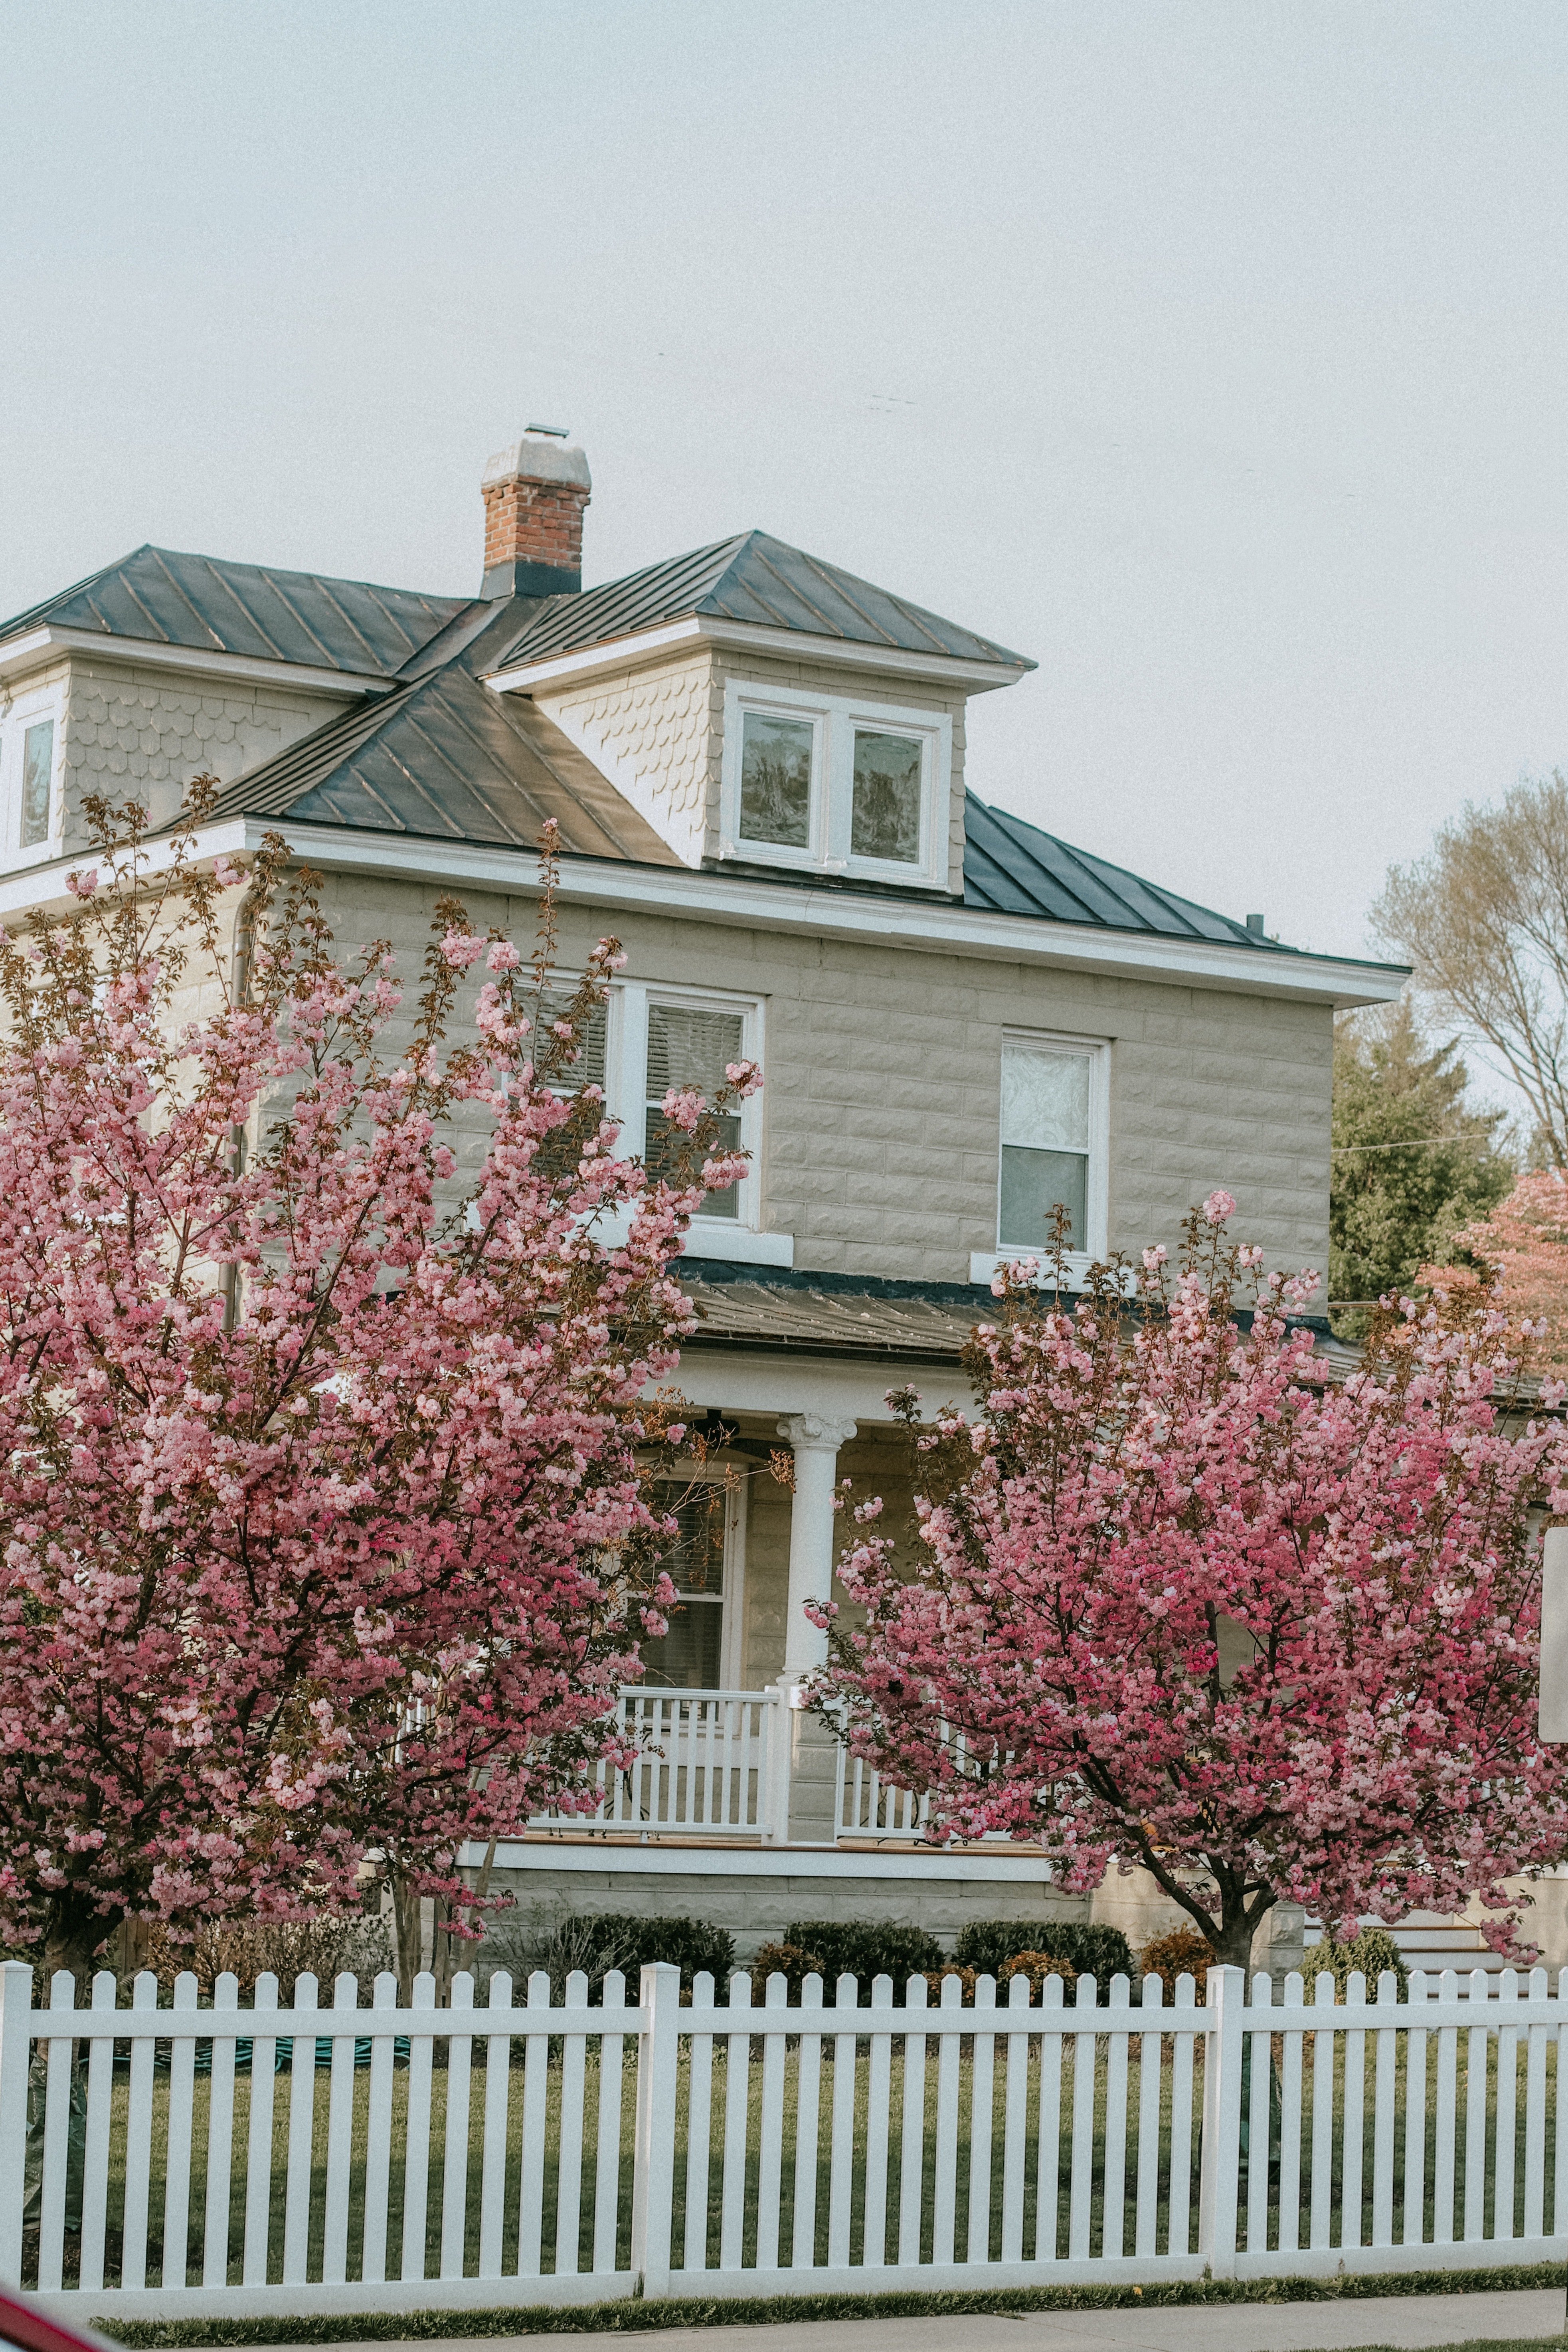 Back in Virginia—such a lovely place compared to Eastern Europe | Source: Pexels